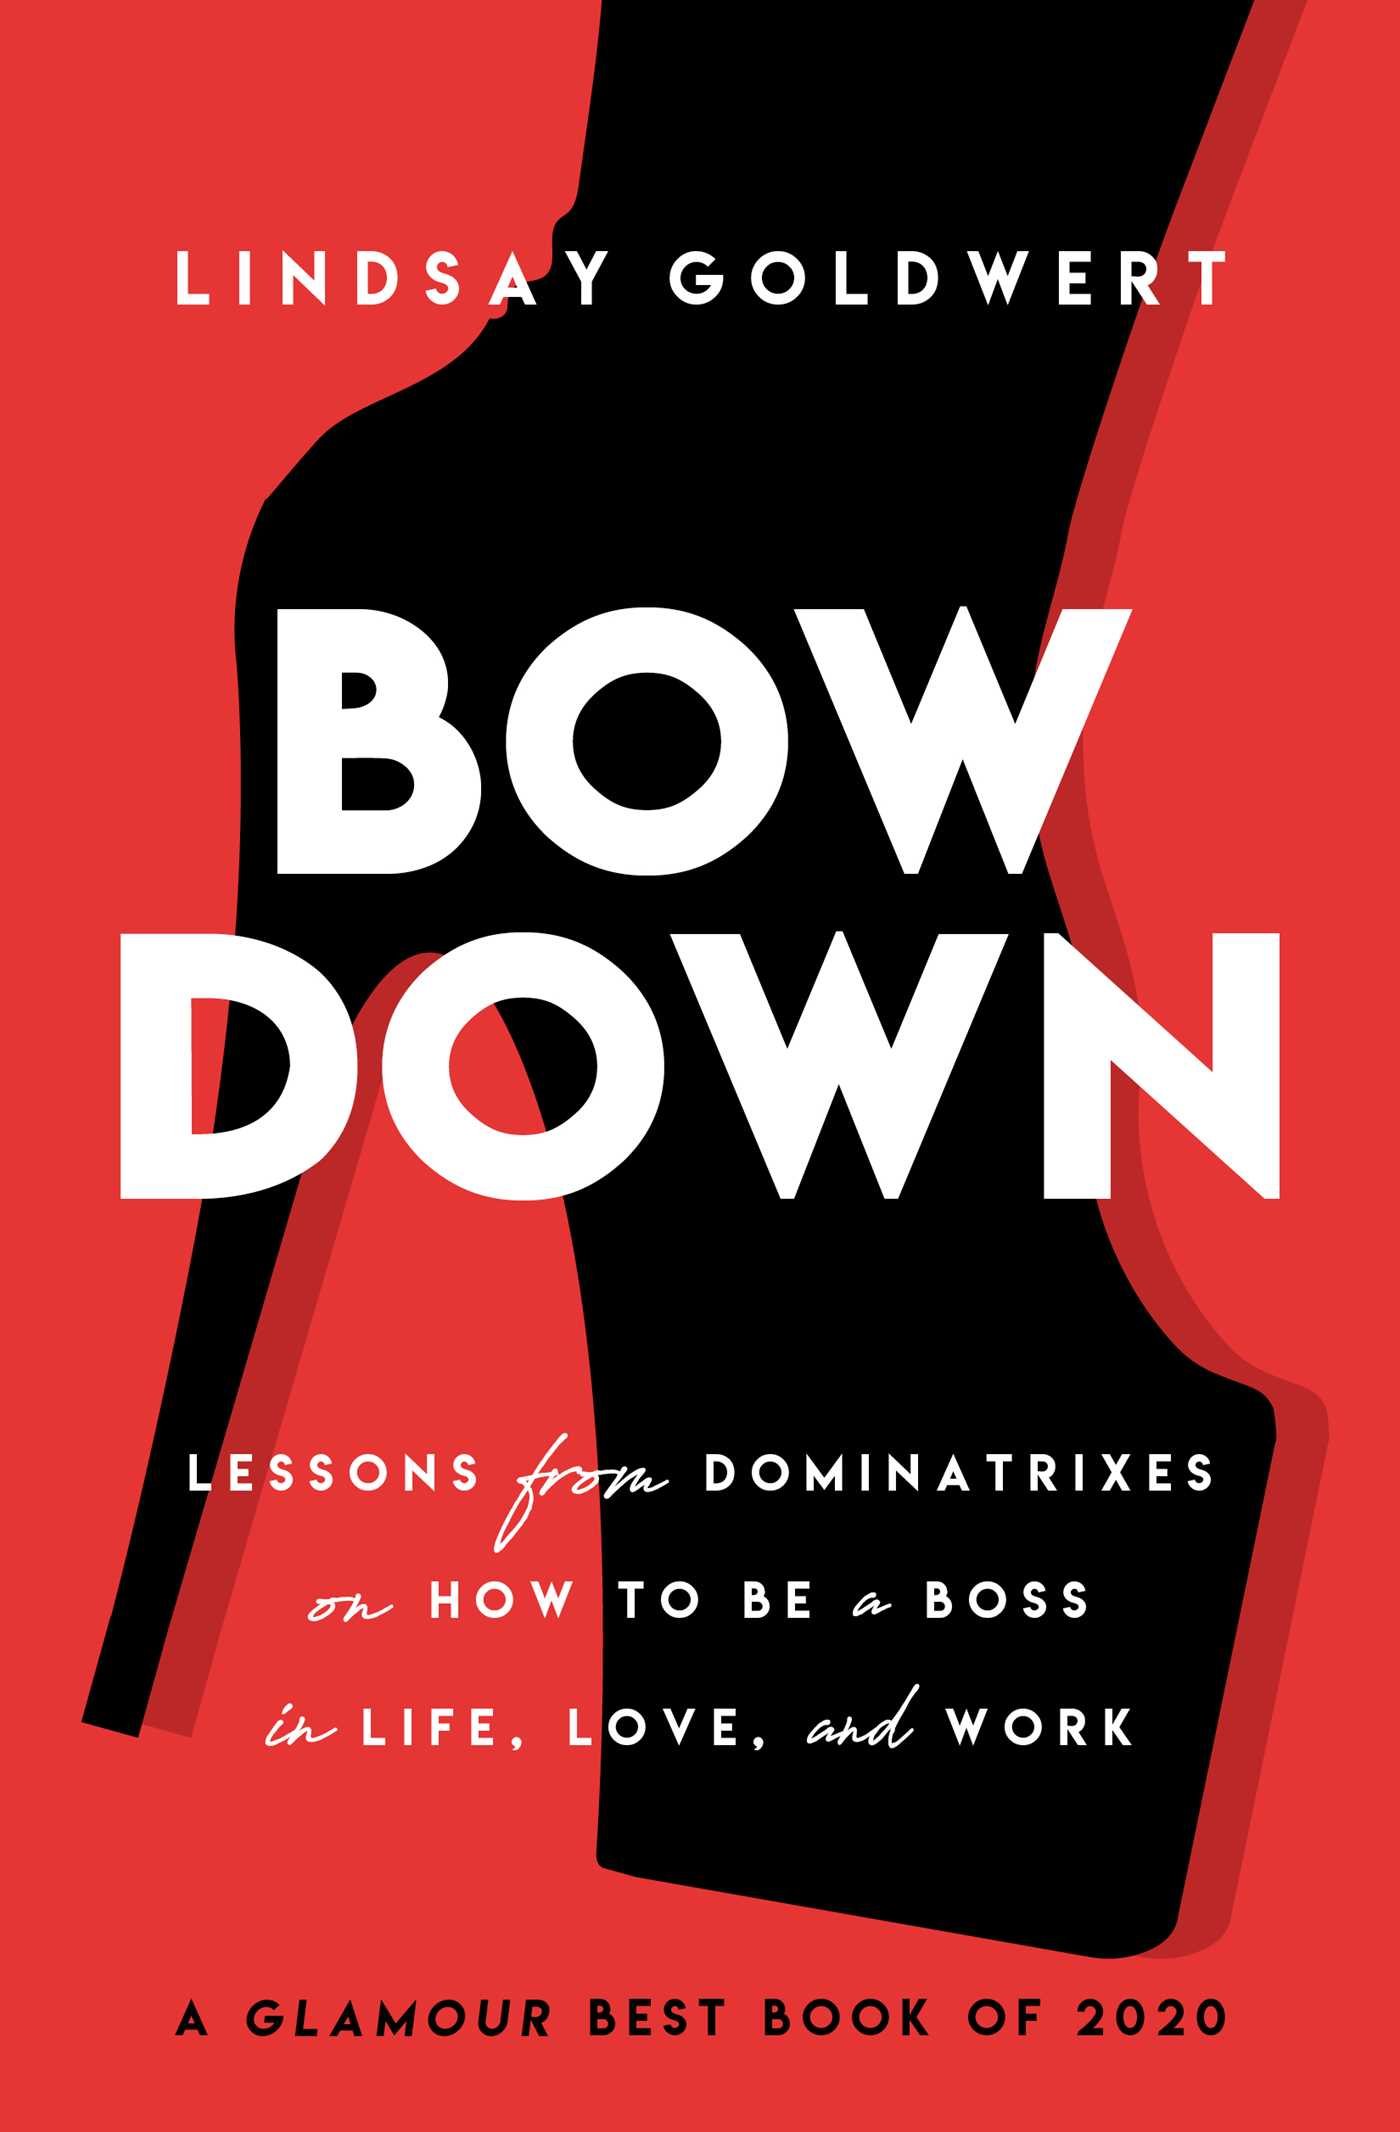 One of Glamour’s Best Books of 2020 Popular podcaster and personal finance expert Lindsay Goldwert explores what dominatrixes can teach us about power and happiness.